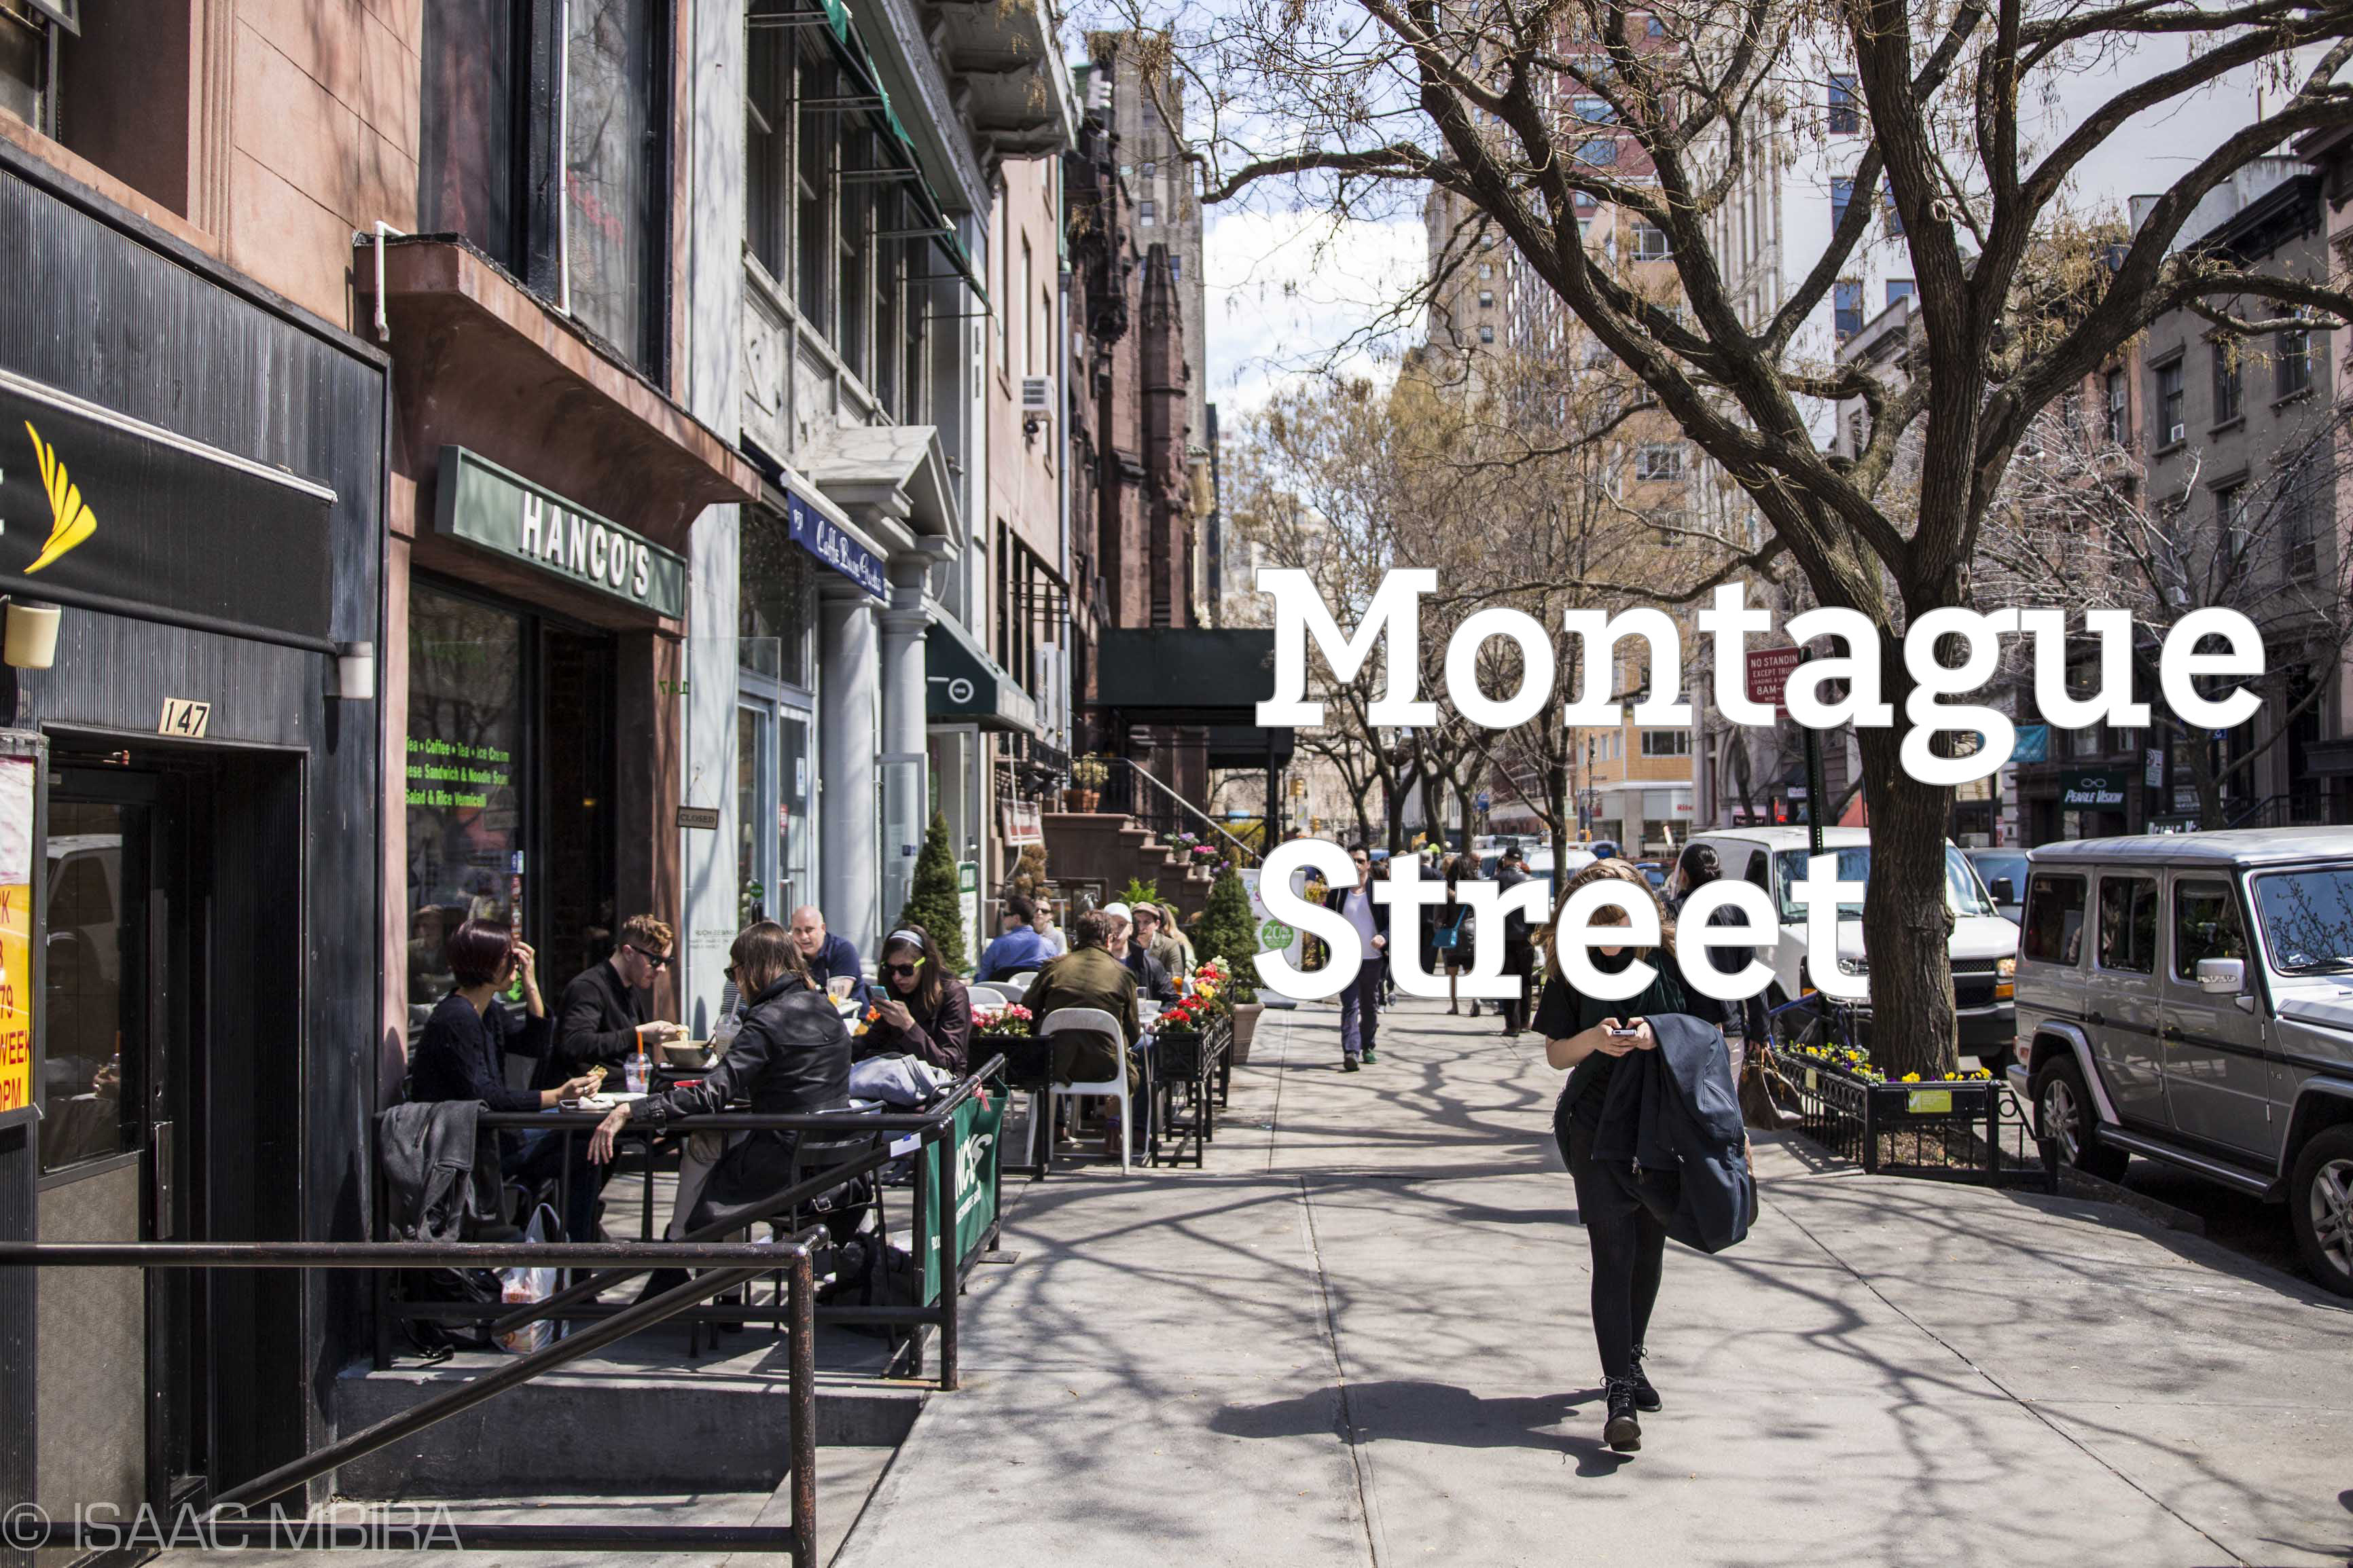 Image of Montague Street